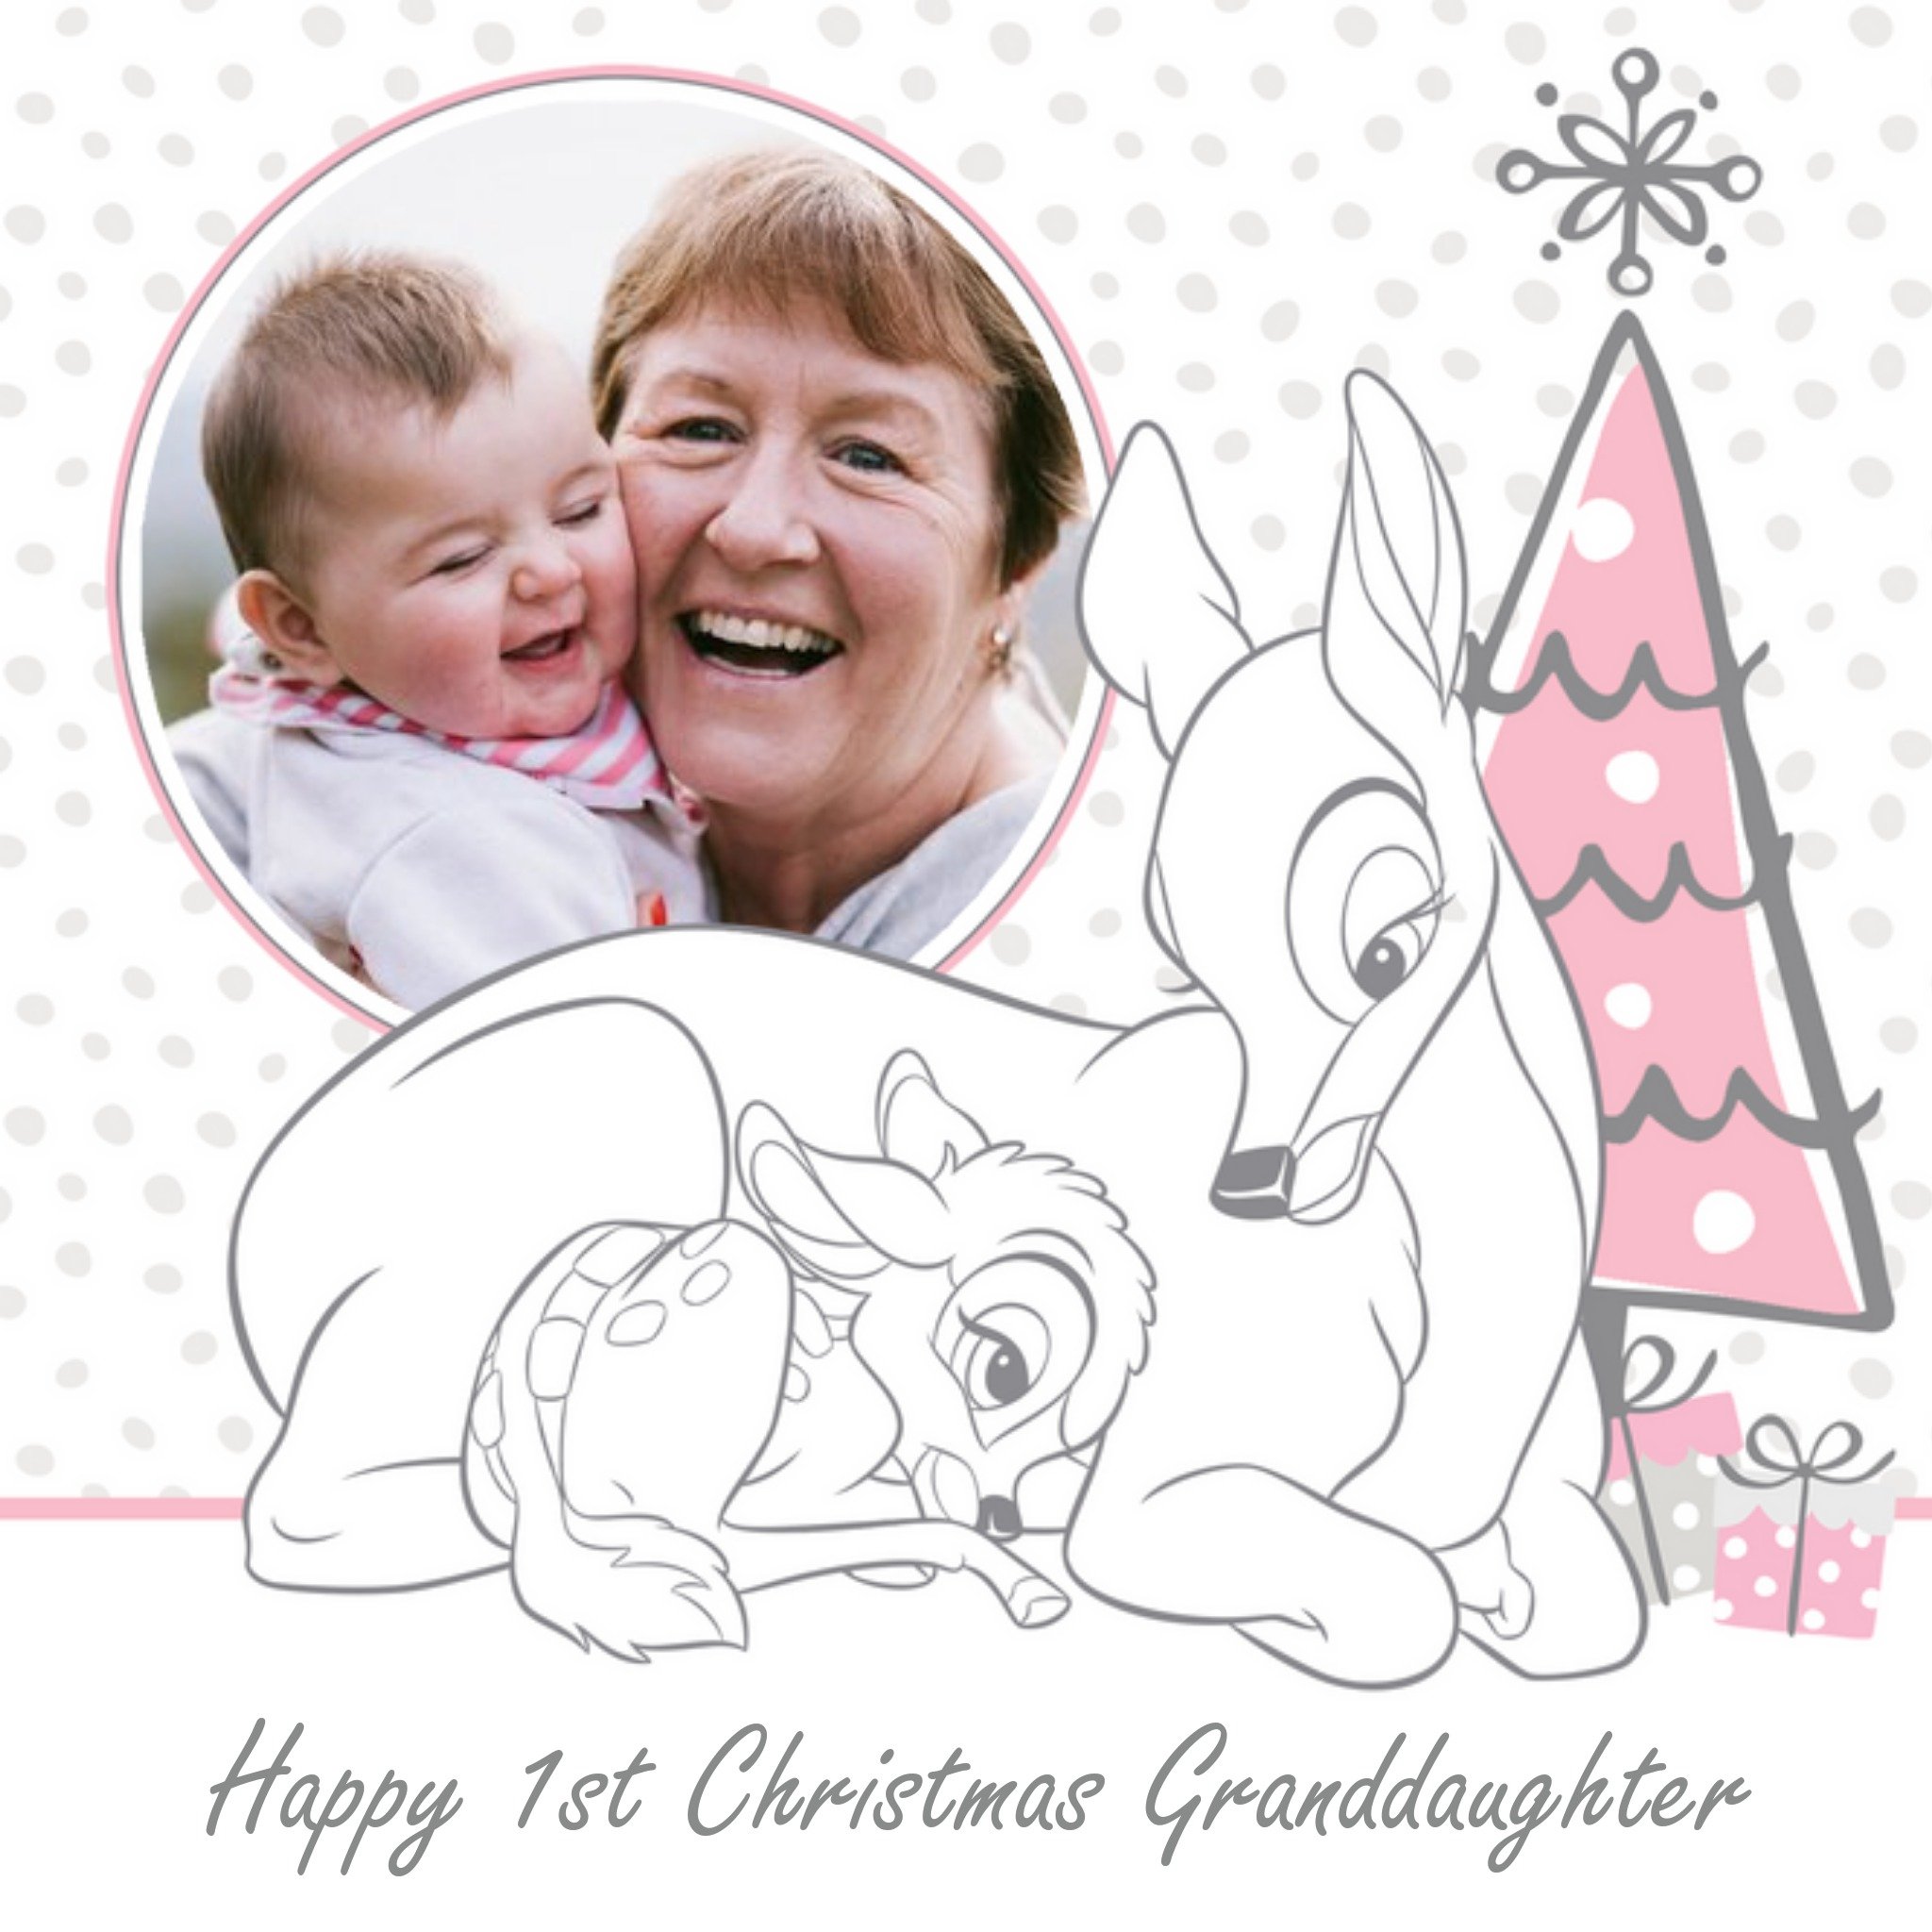 Disney Bambi Personalised Photo Upload Christmas Card For Granddaughter, Large